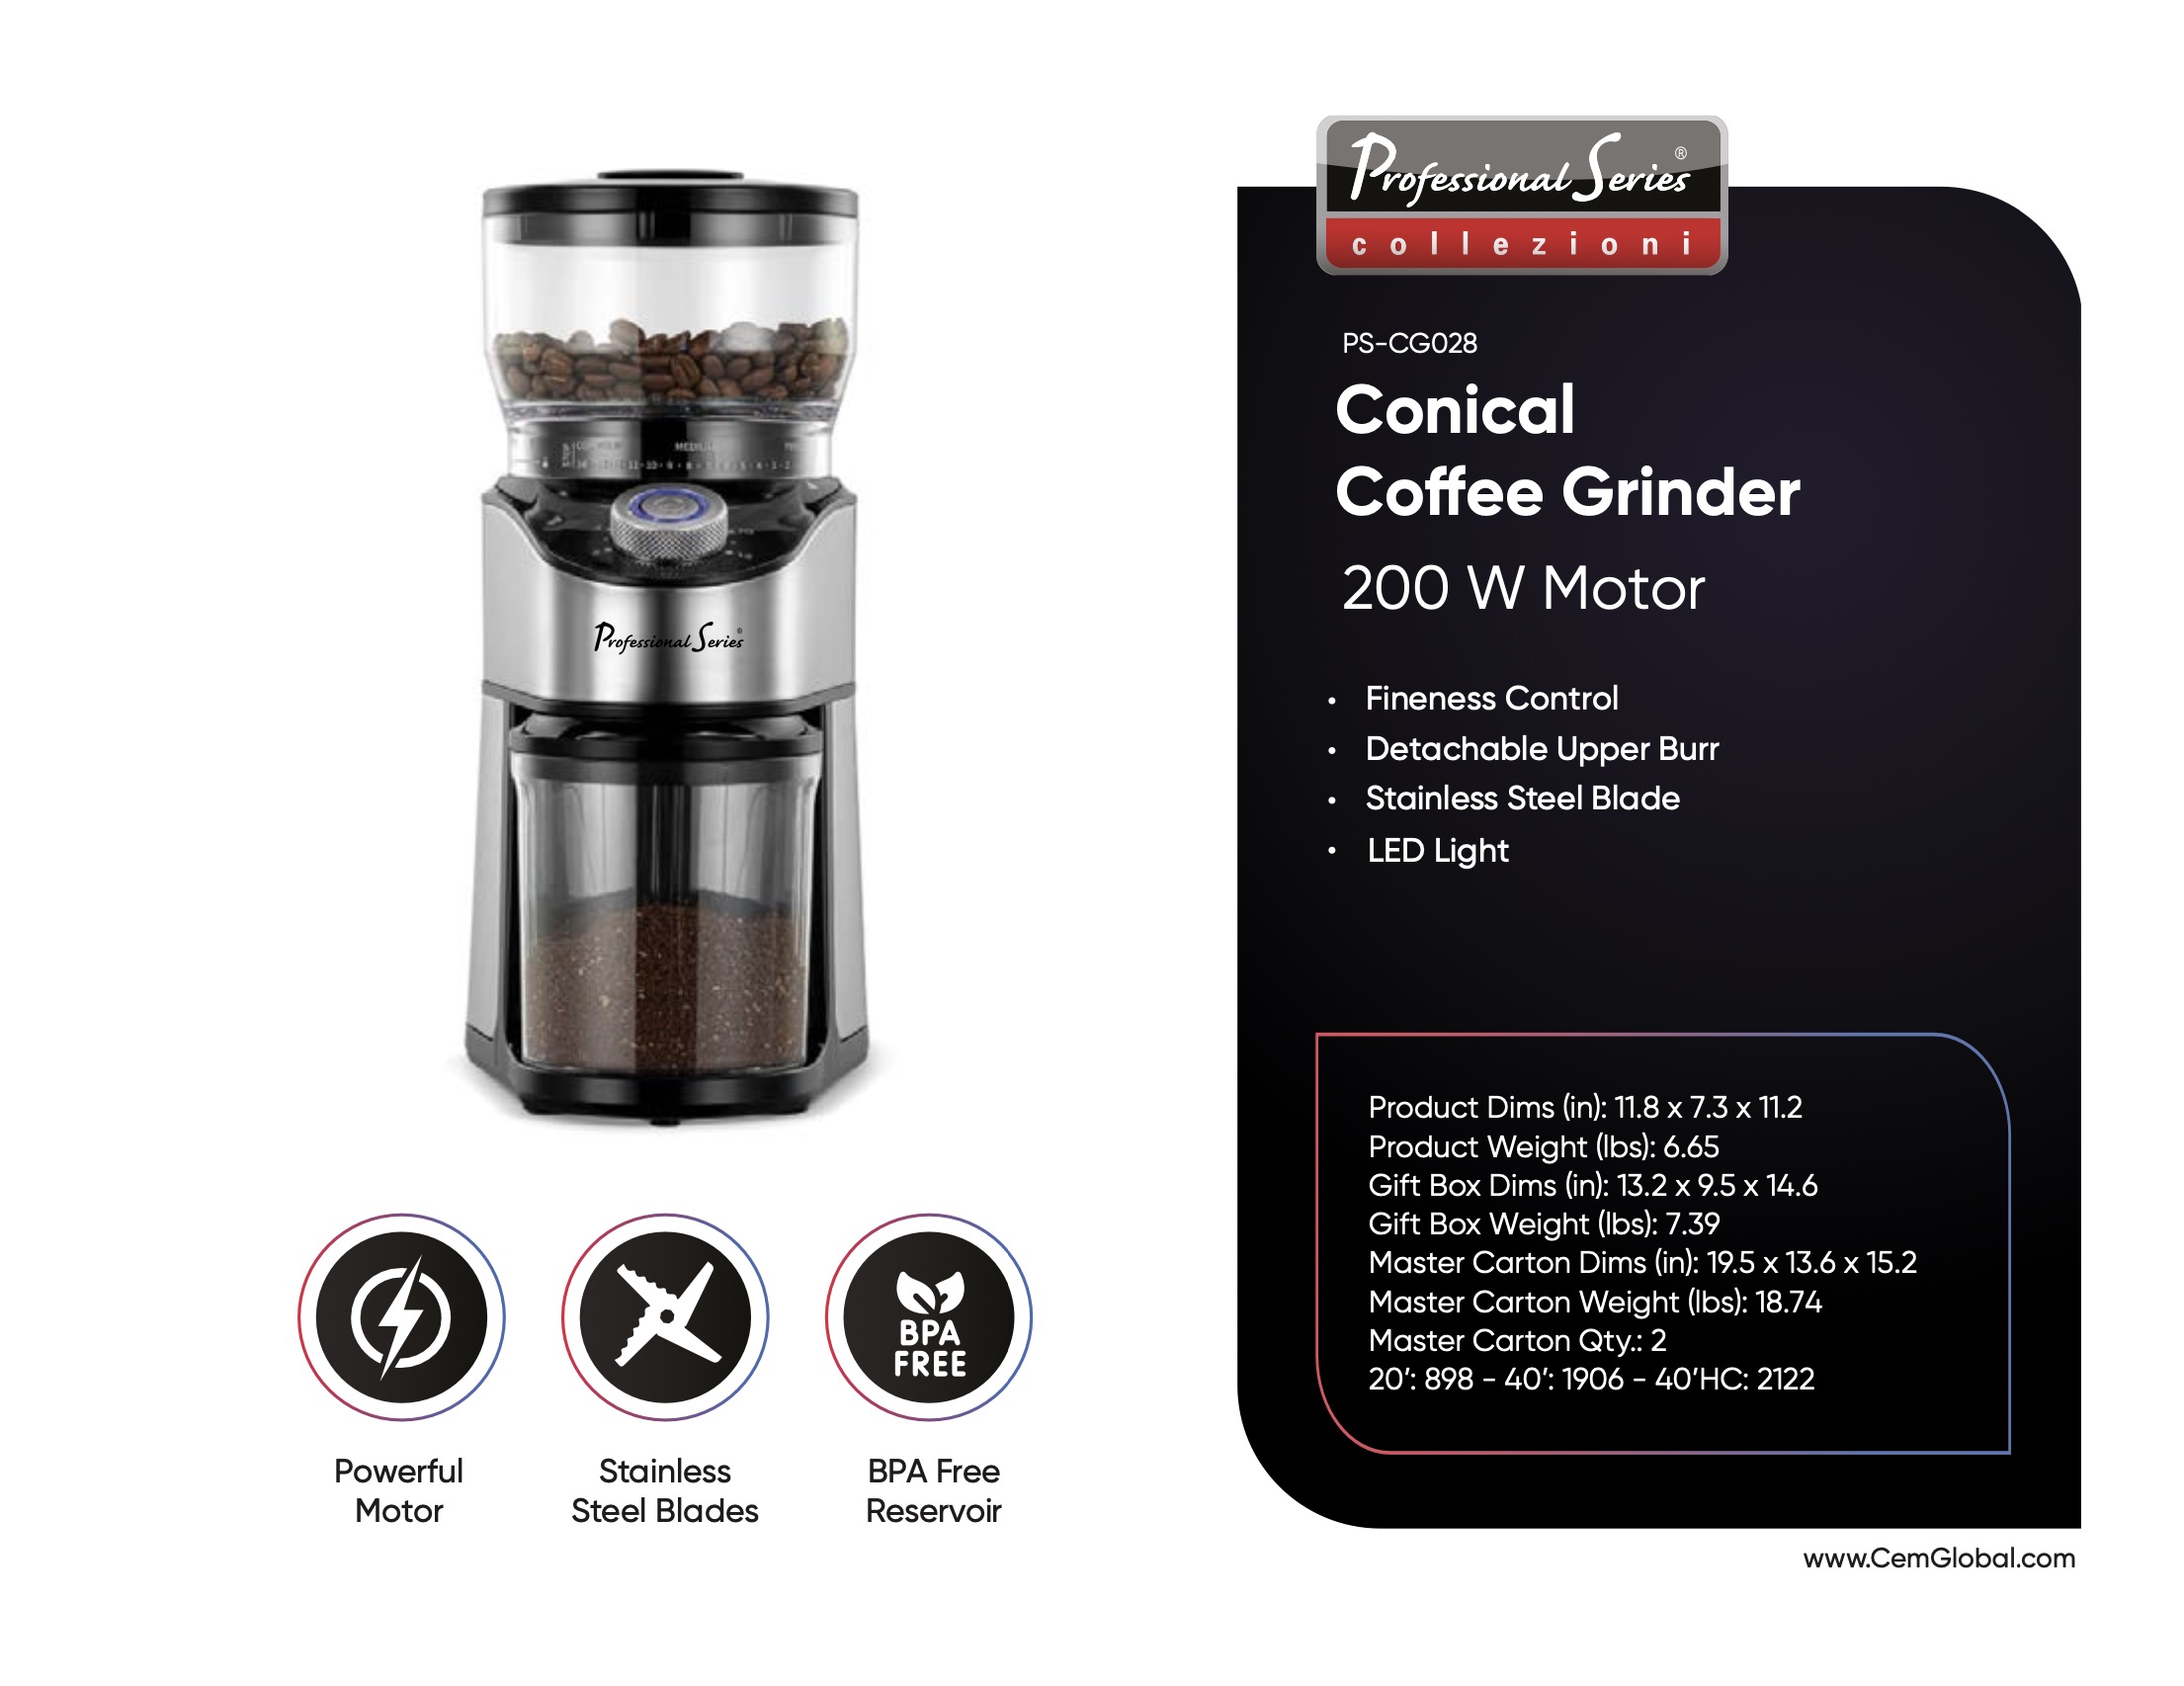 Conical Coffee Grinder